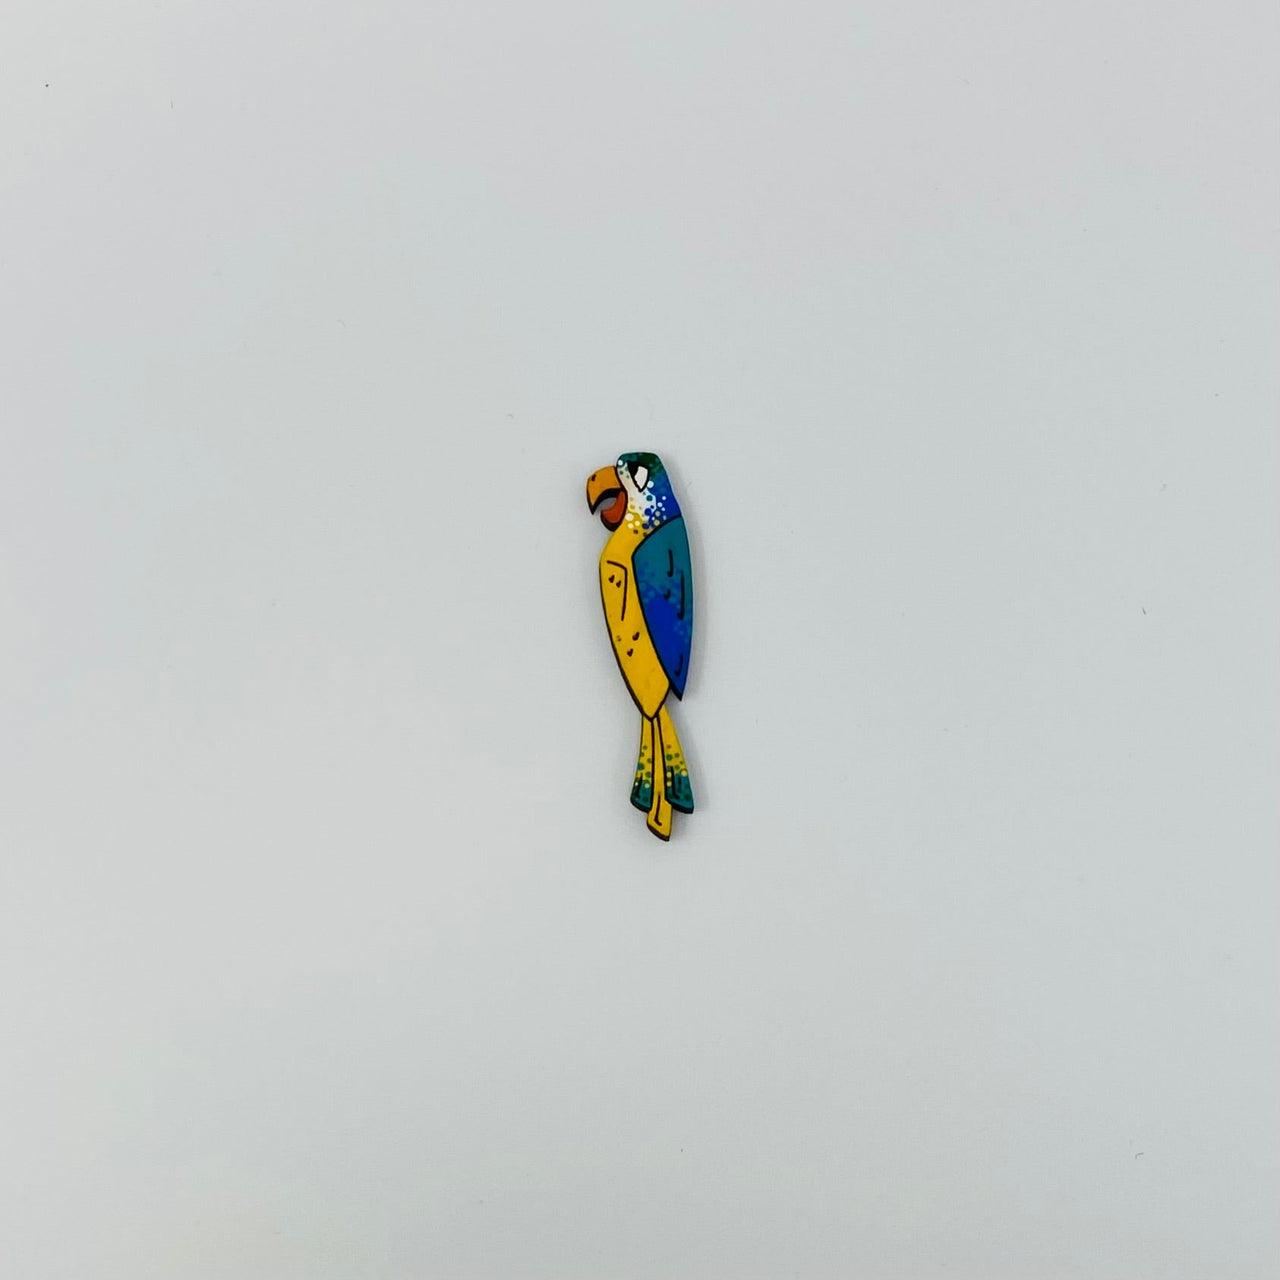 SALE! Hand Painted Parrot Litewood™️ Lapel Pin in Yellow